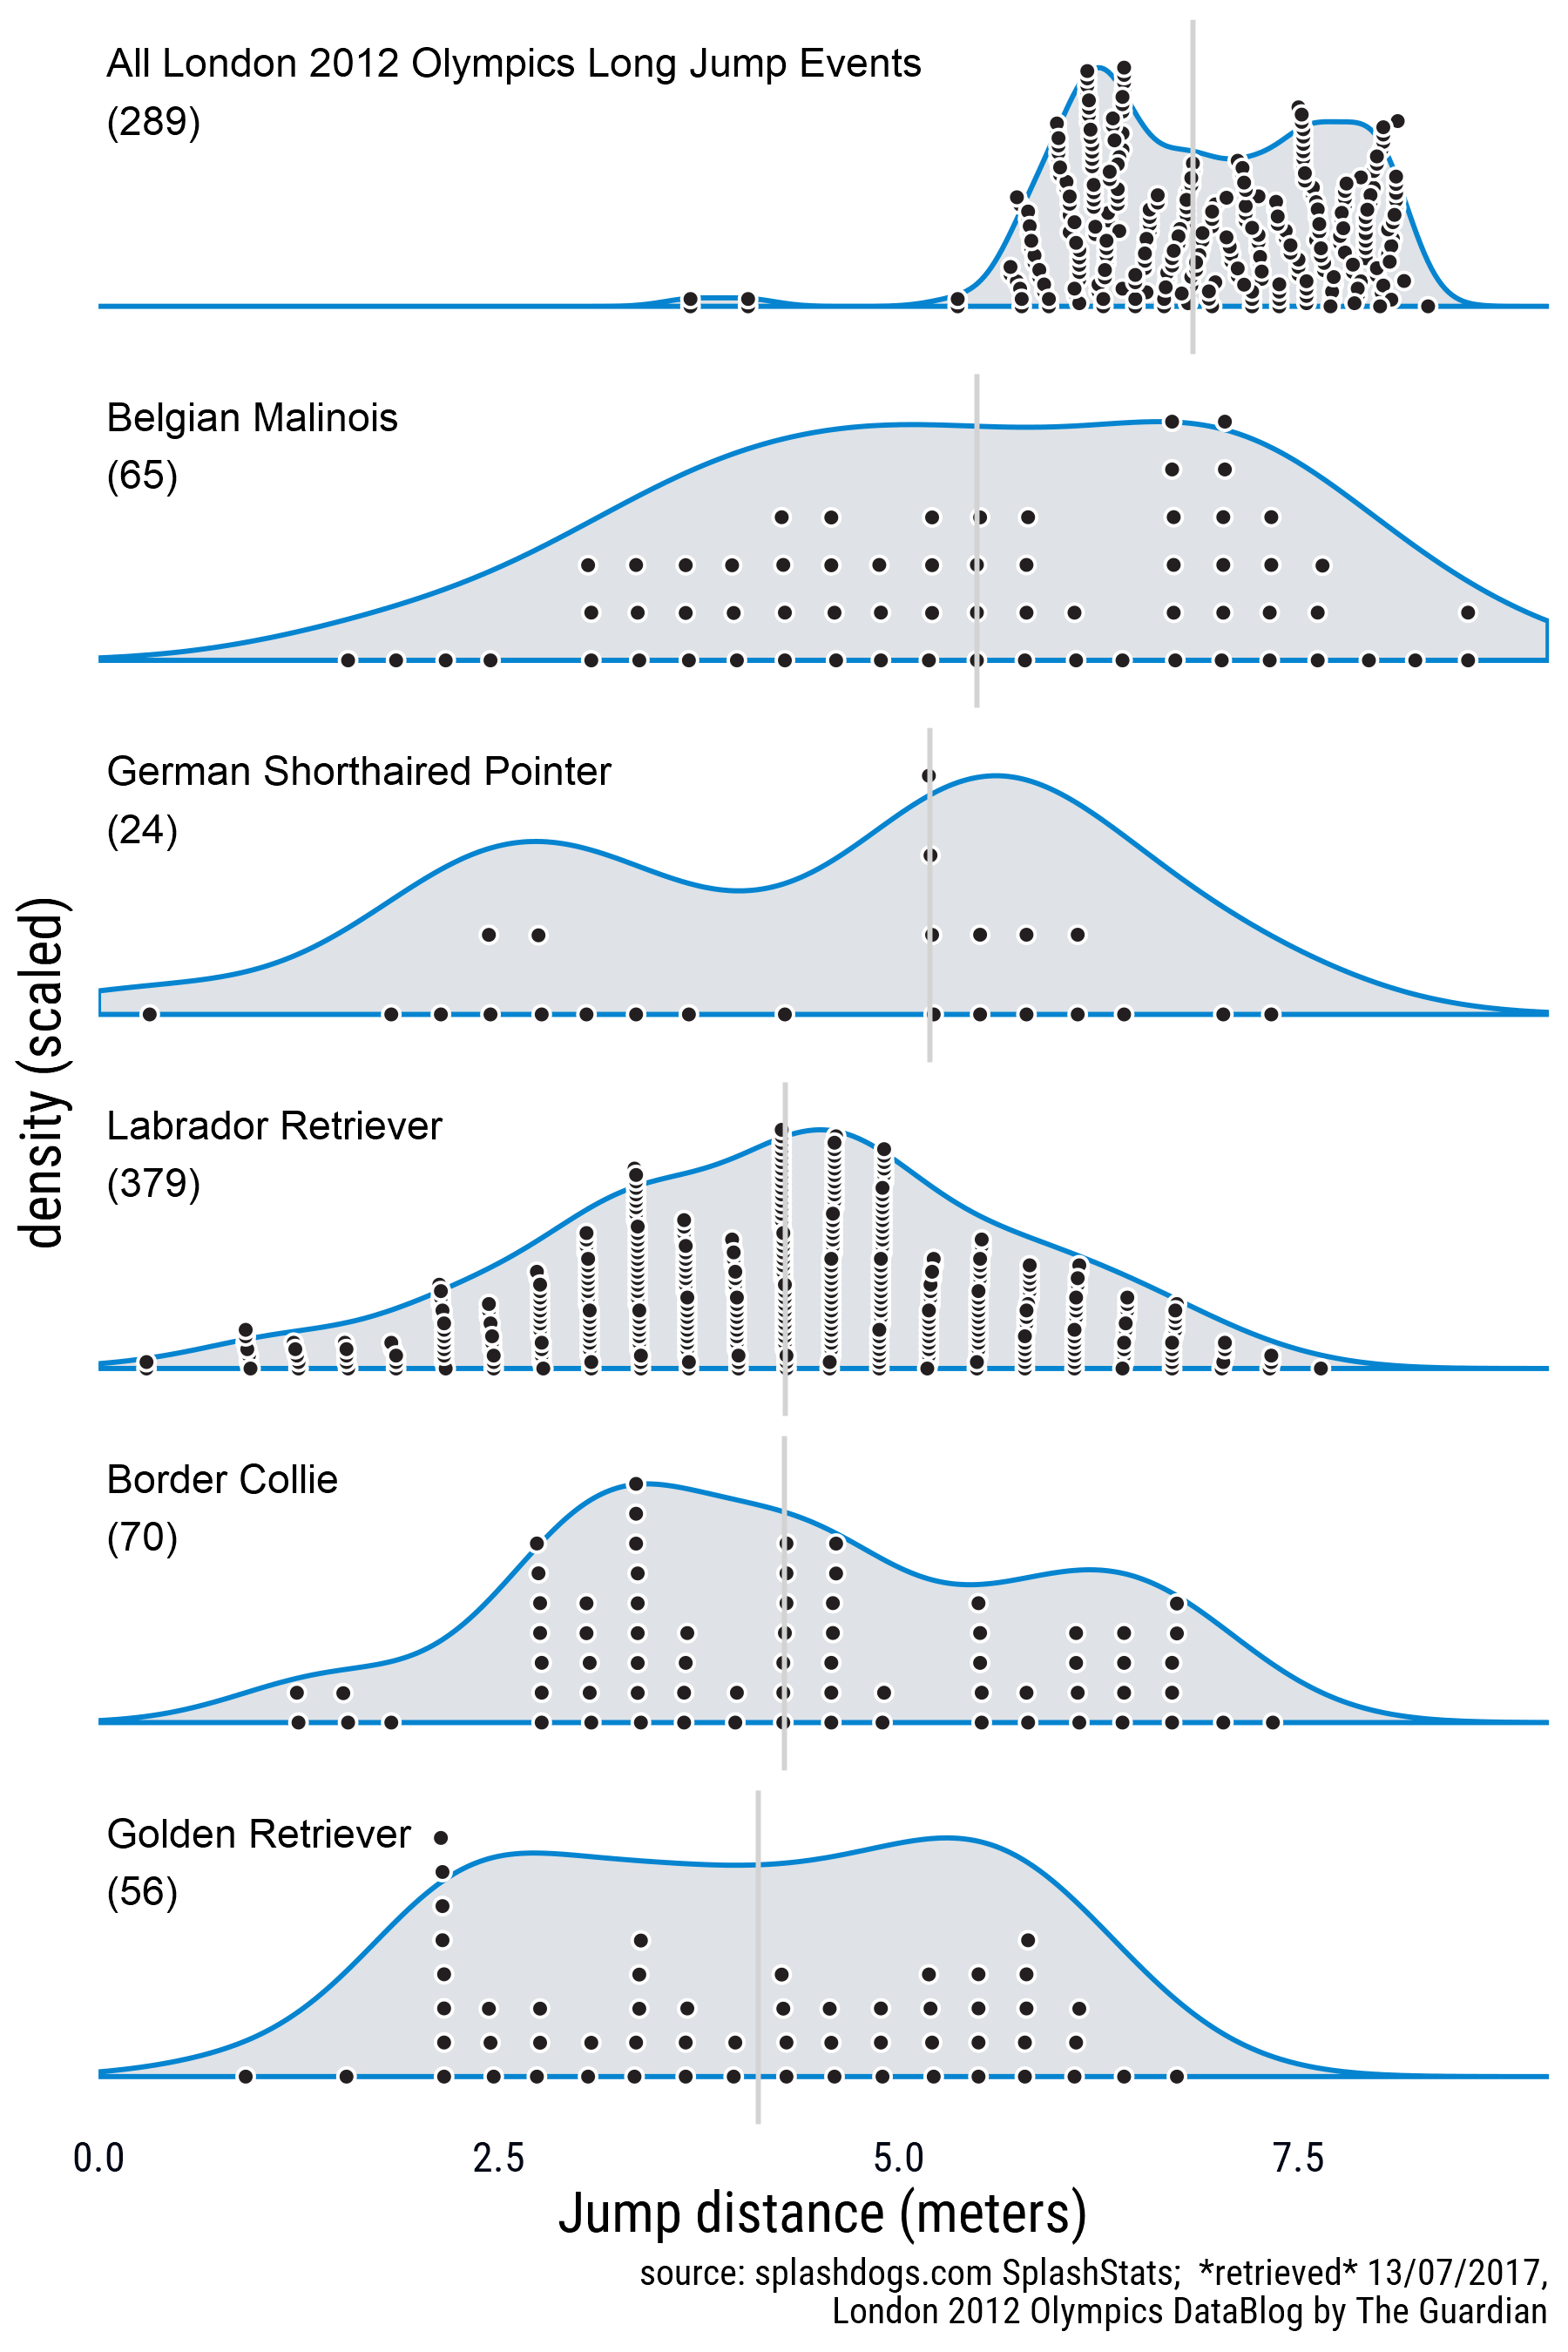 Jumping dogs and density plots